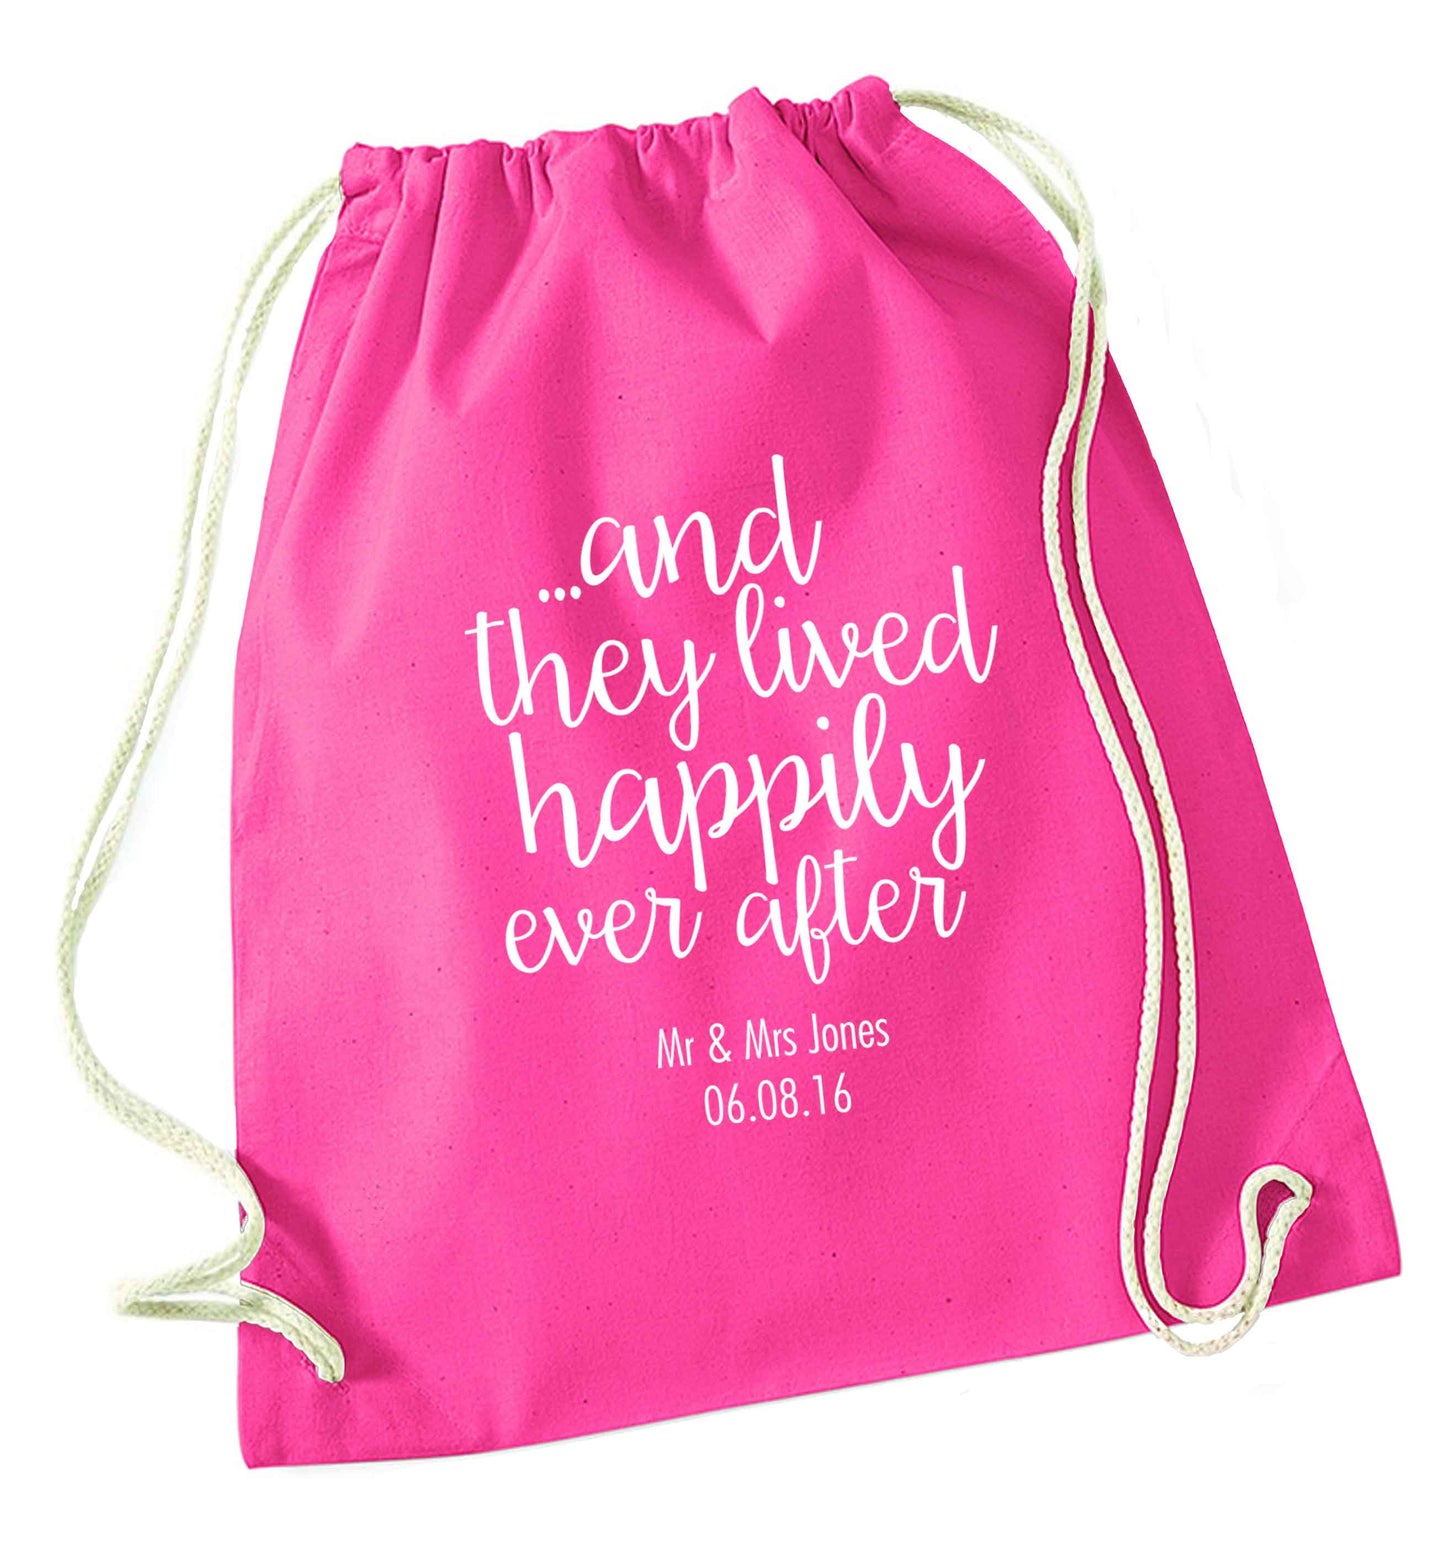 ...and they lived happily ever after - personalised date and names pink drawstring bag